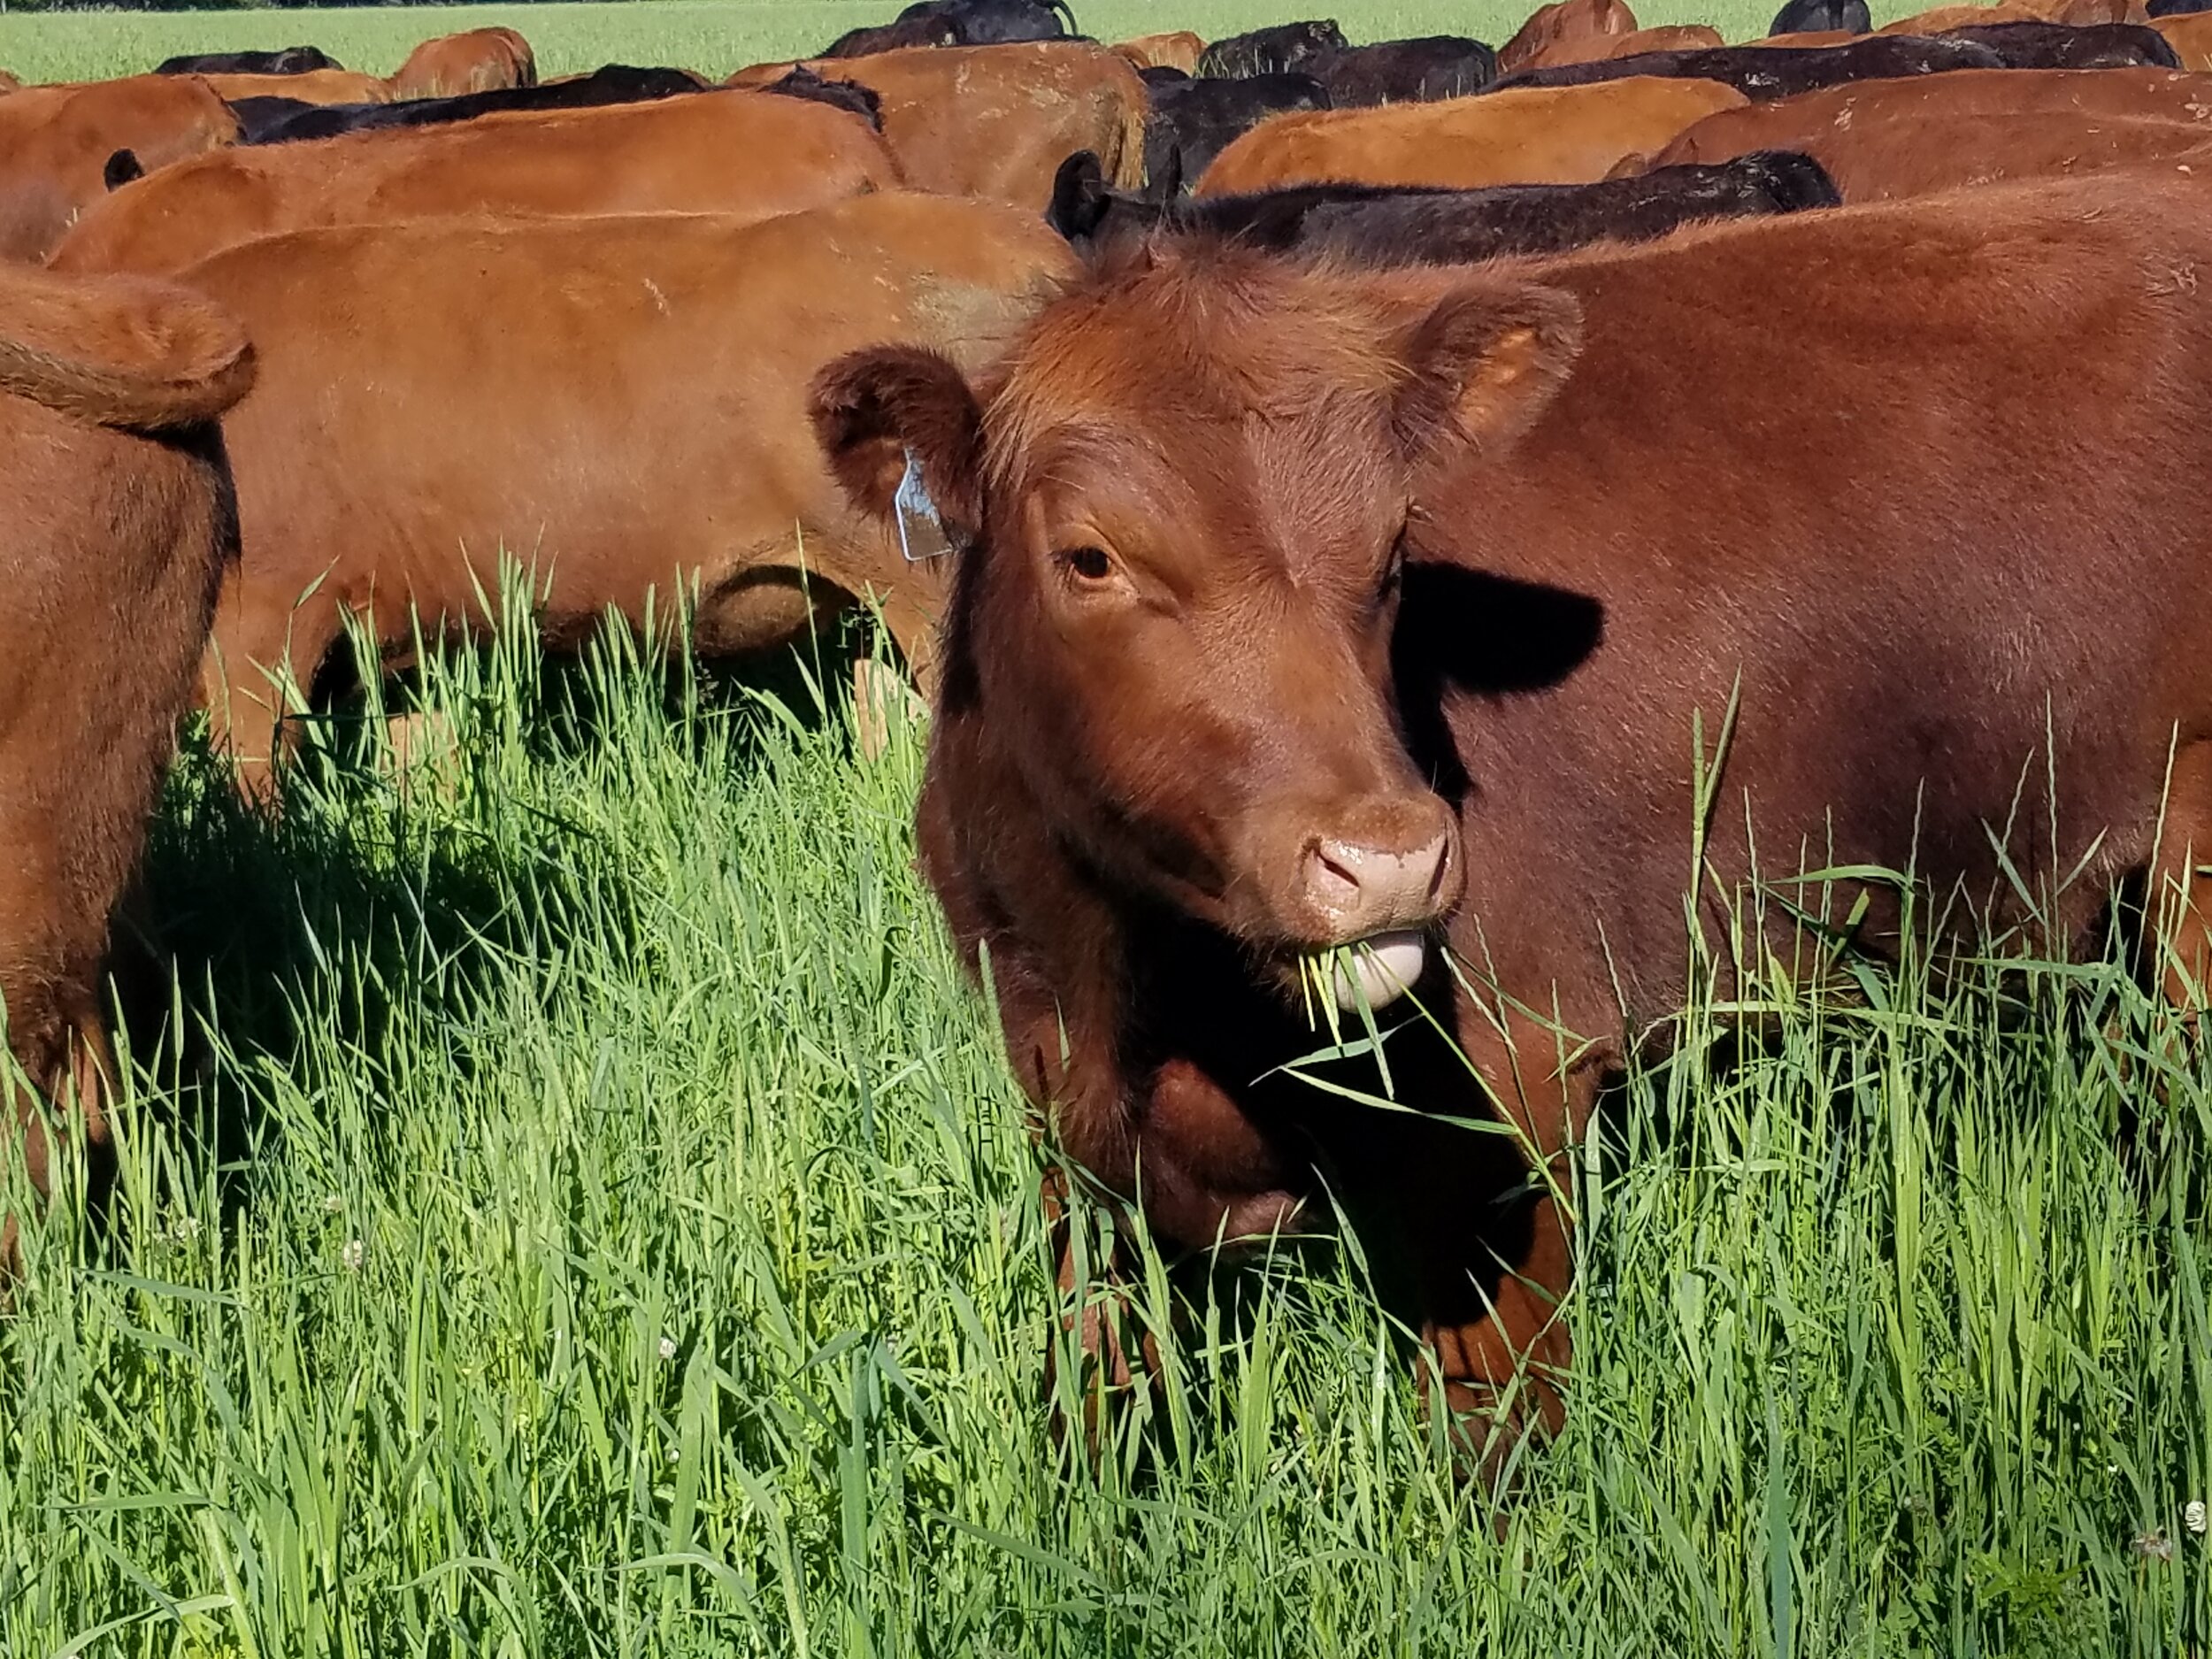 cattle closeup with grass in mouth.jpg